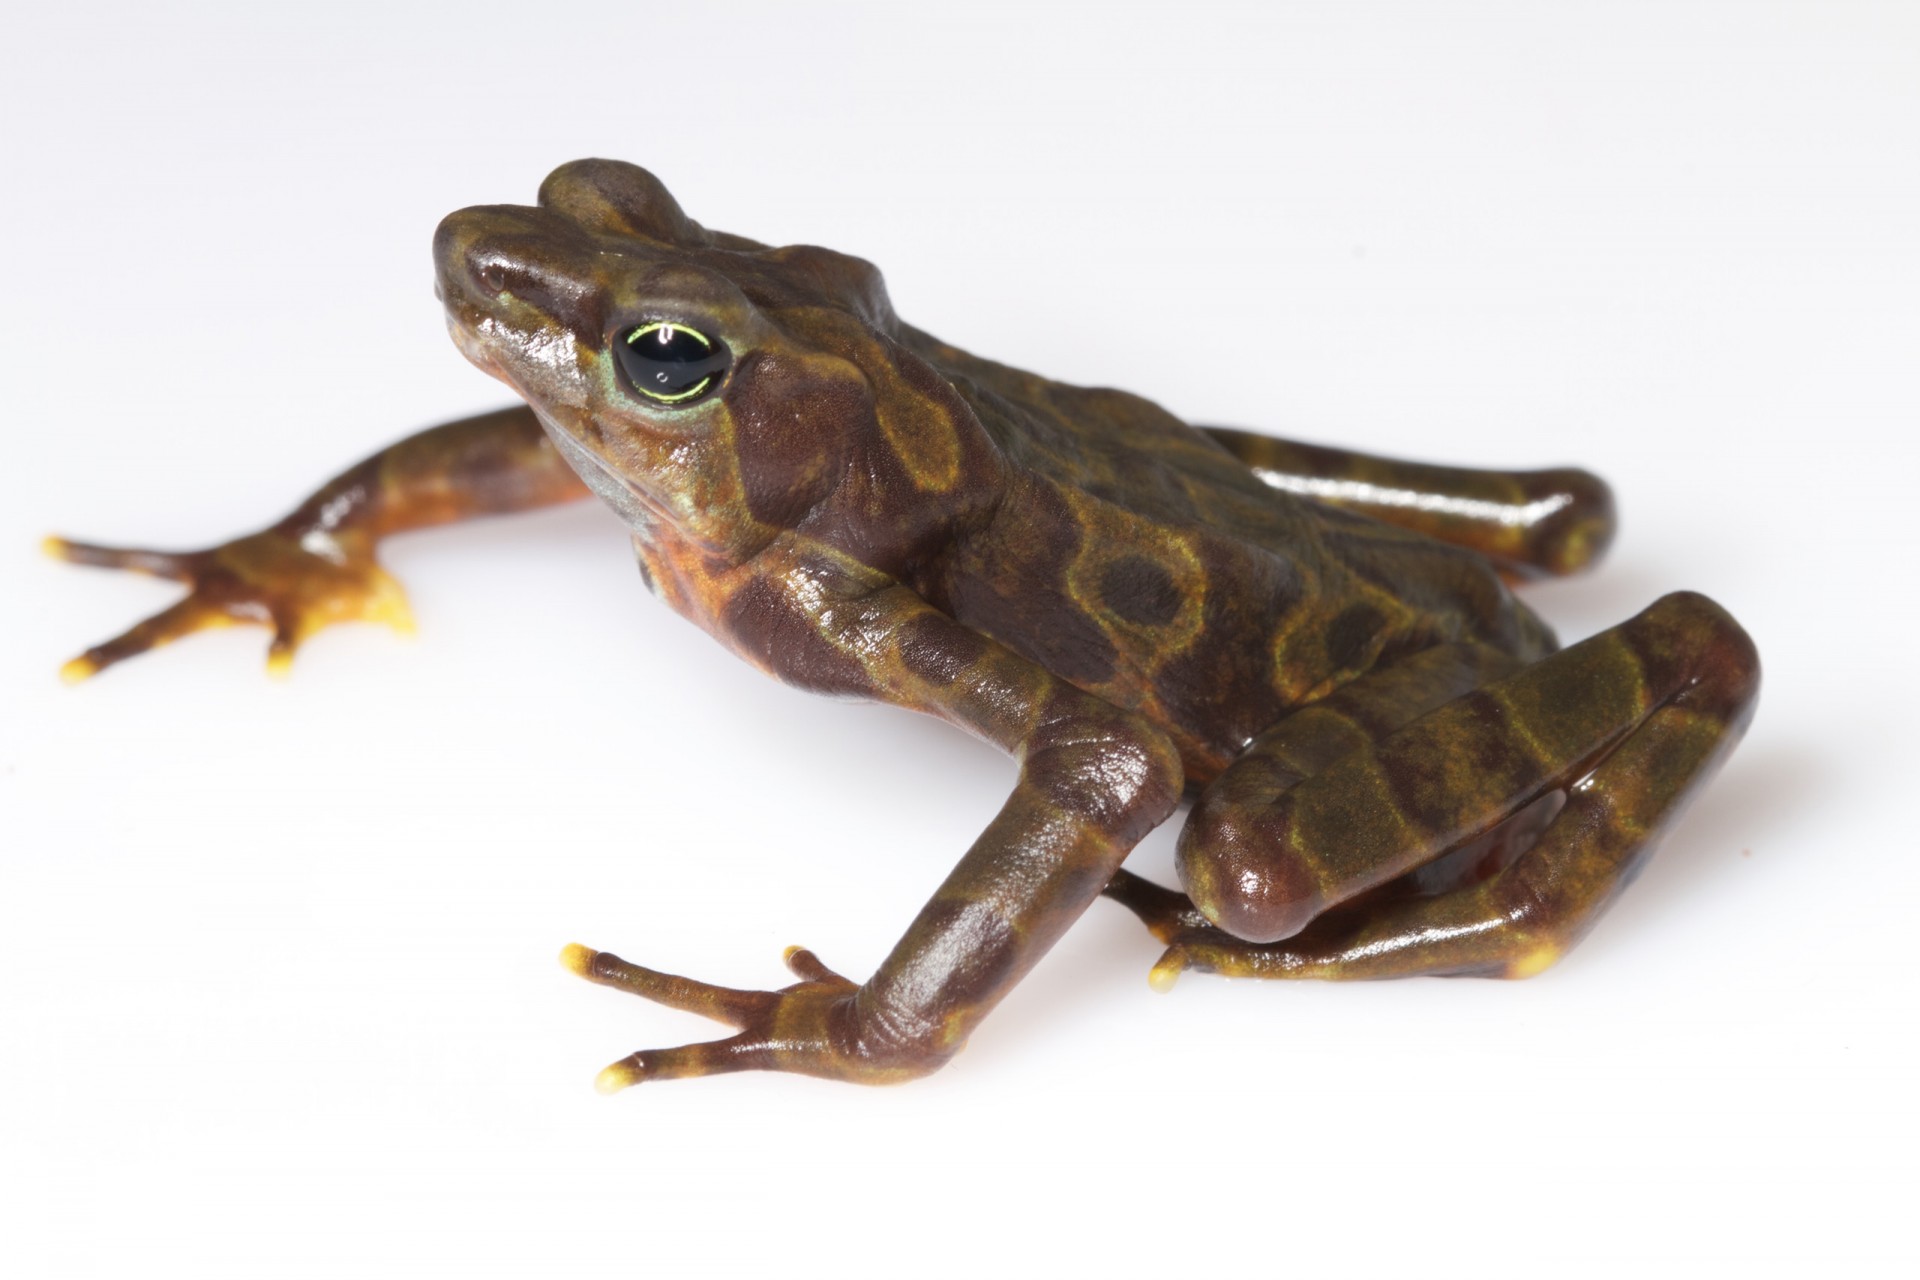 This Panamanian frog demonstrates a very wide range of color patters, thus its name, Atelopus varius